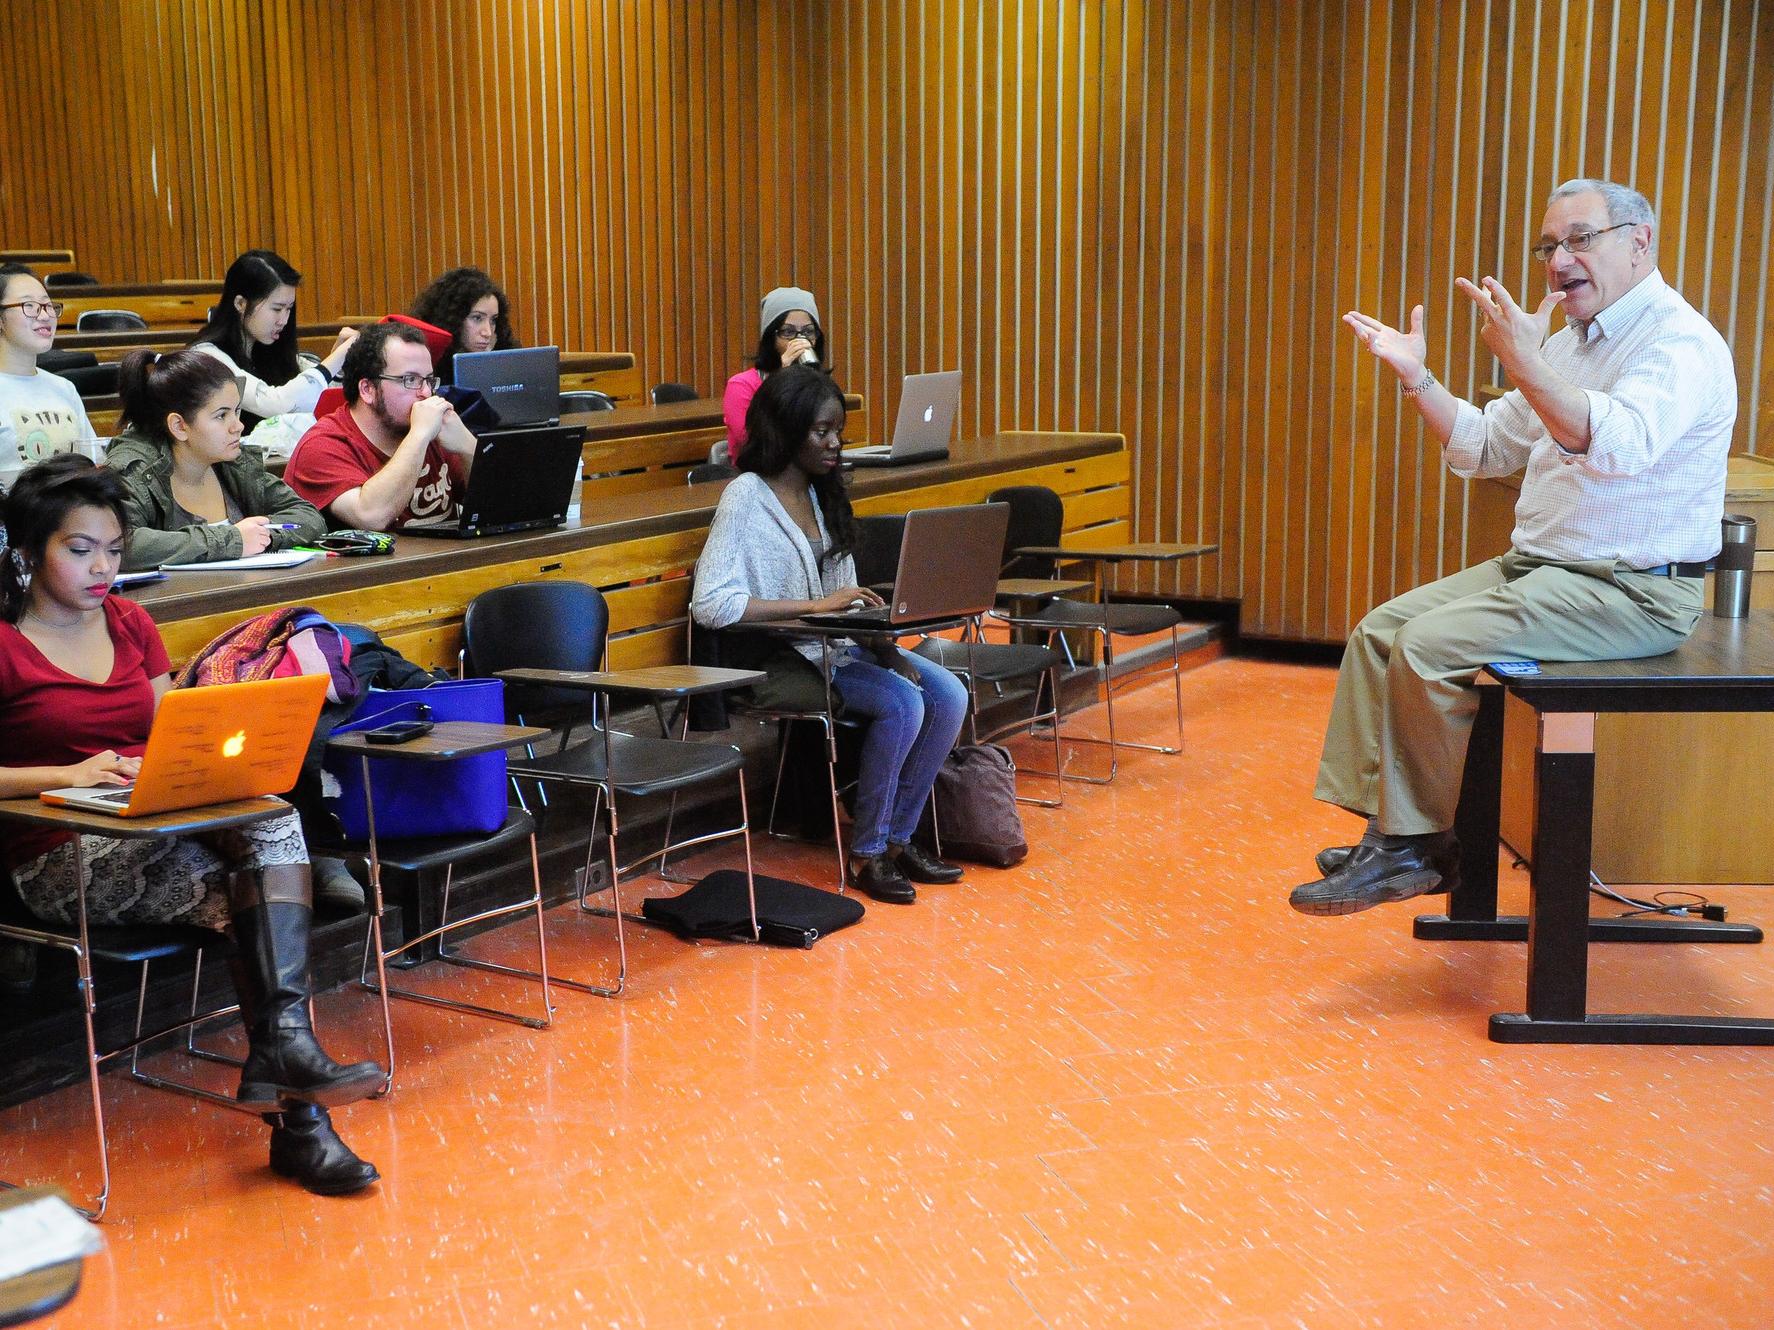 A professor teaching a group of students in a lecture hall